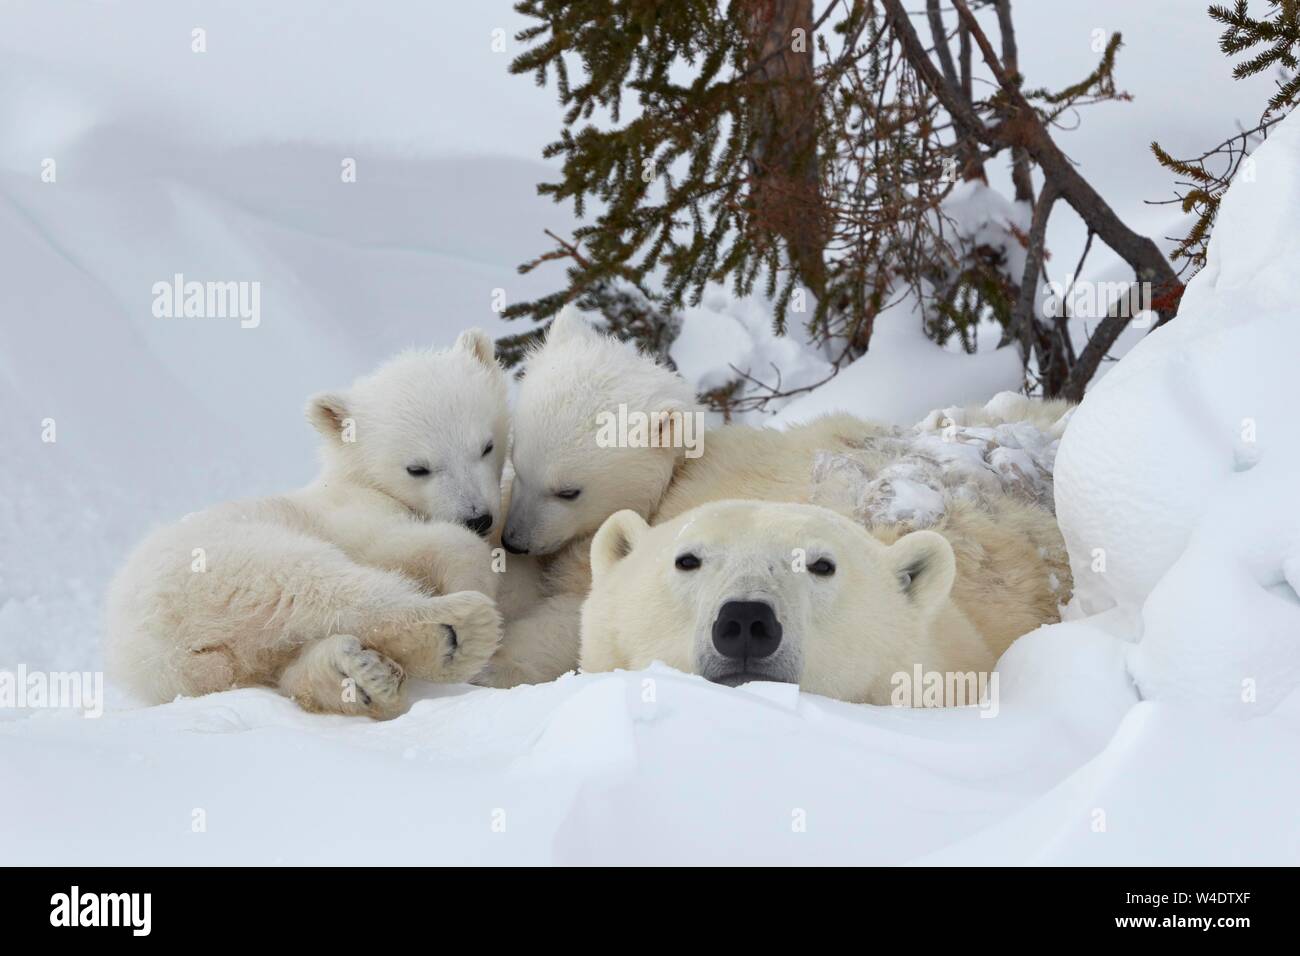 Polar bears (Ursus maritimus), mother animal with two newborn animals cuddled together in the snow, Wapusk National Park, Manitoba, Canada Stock Photo